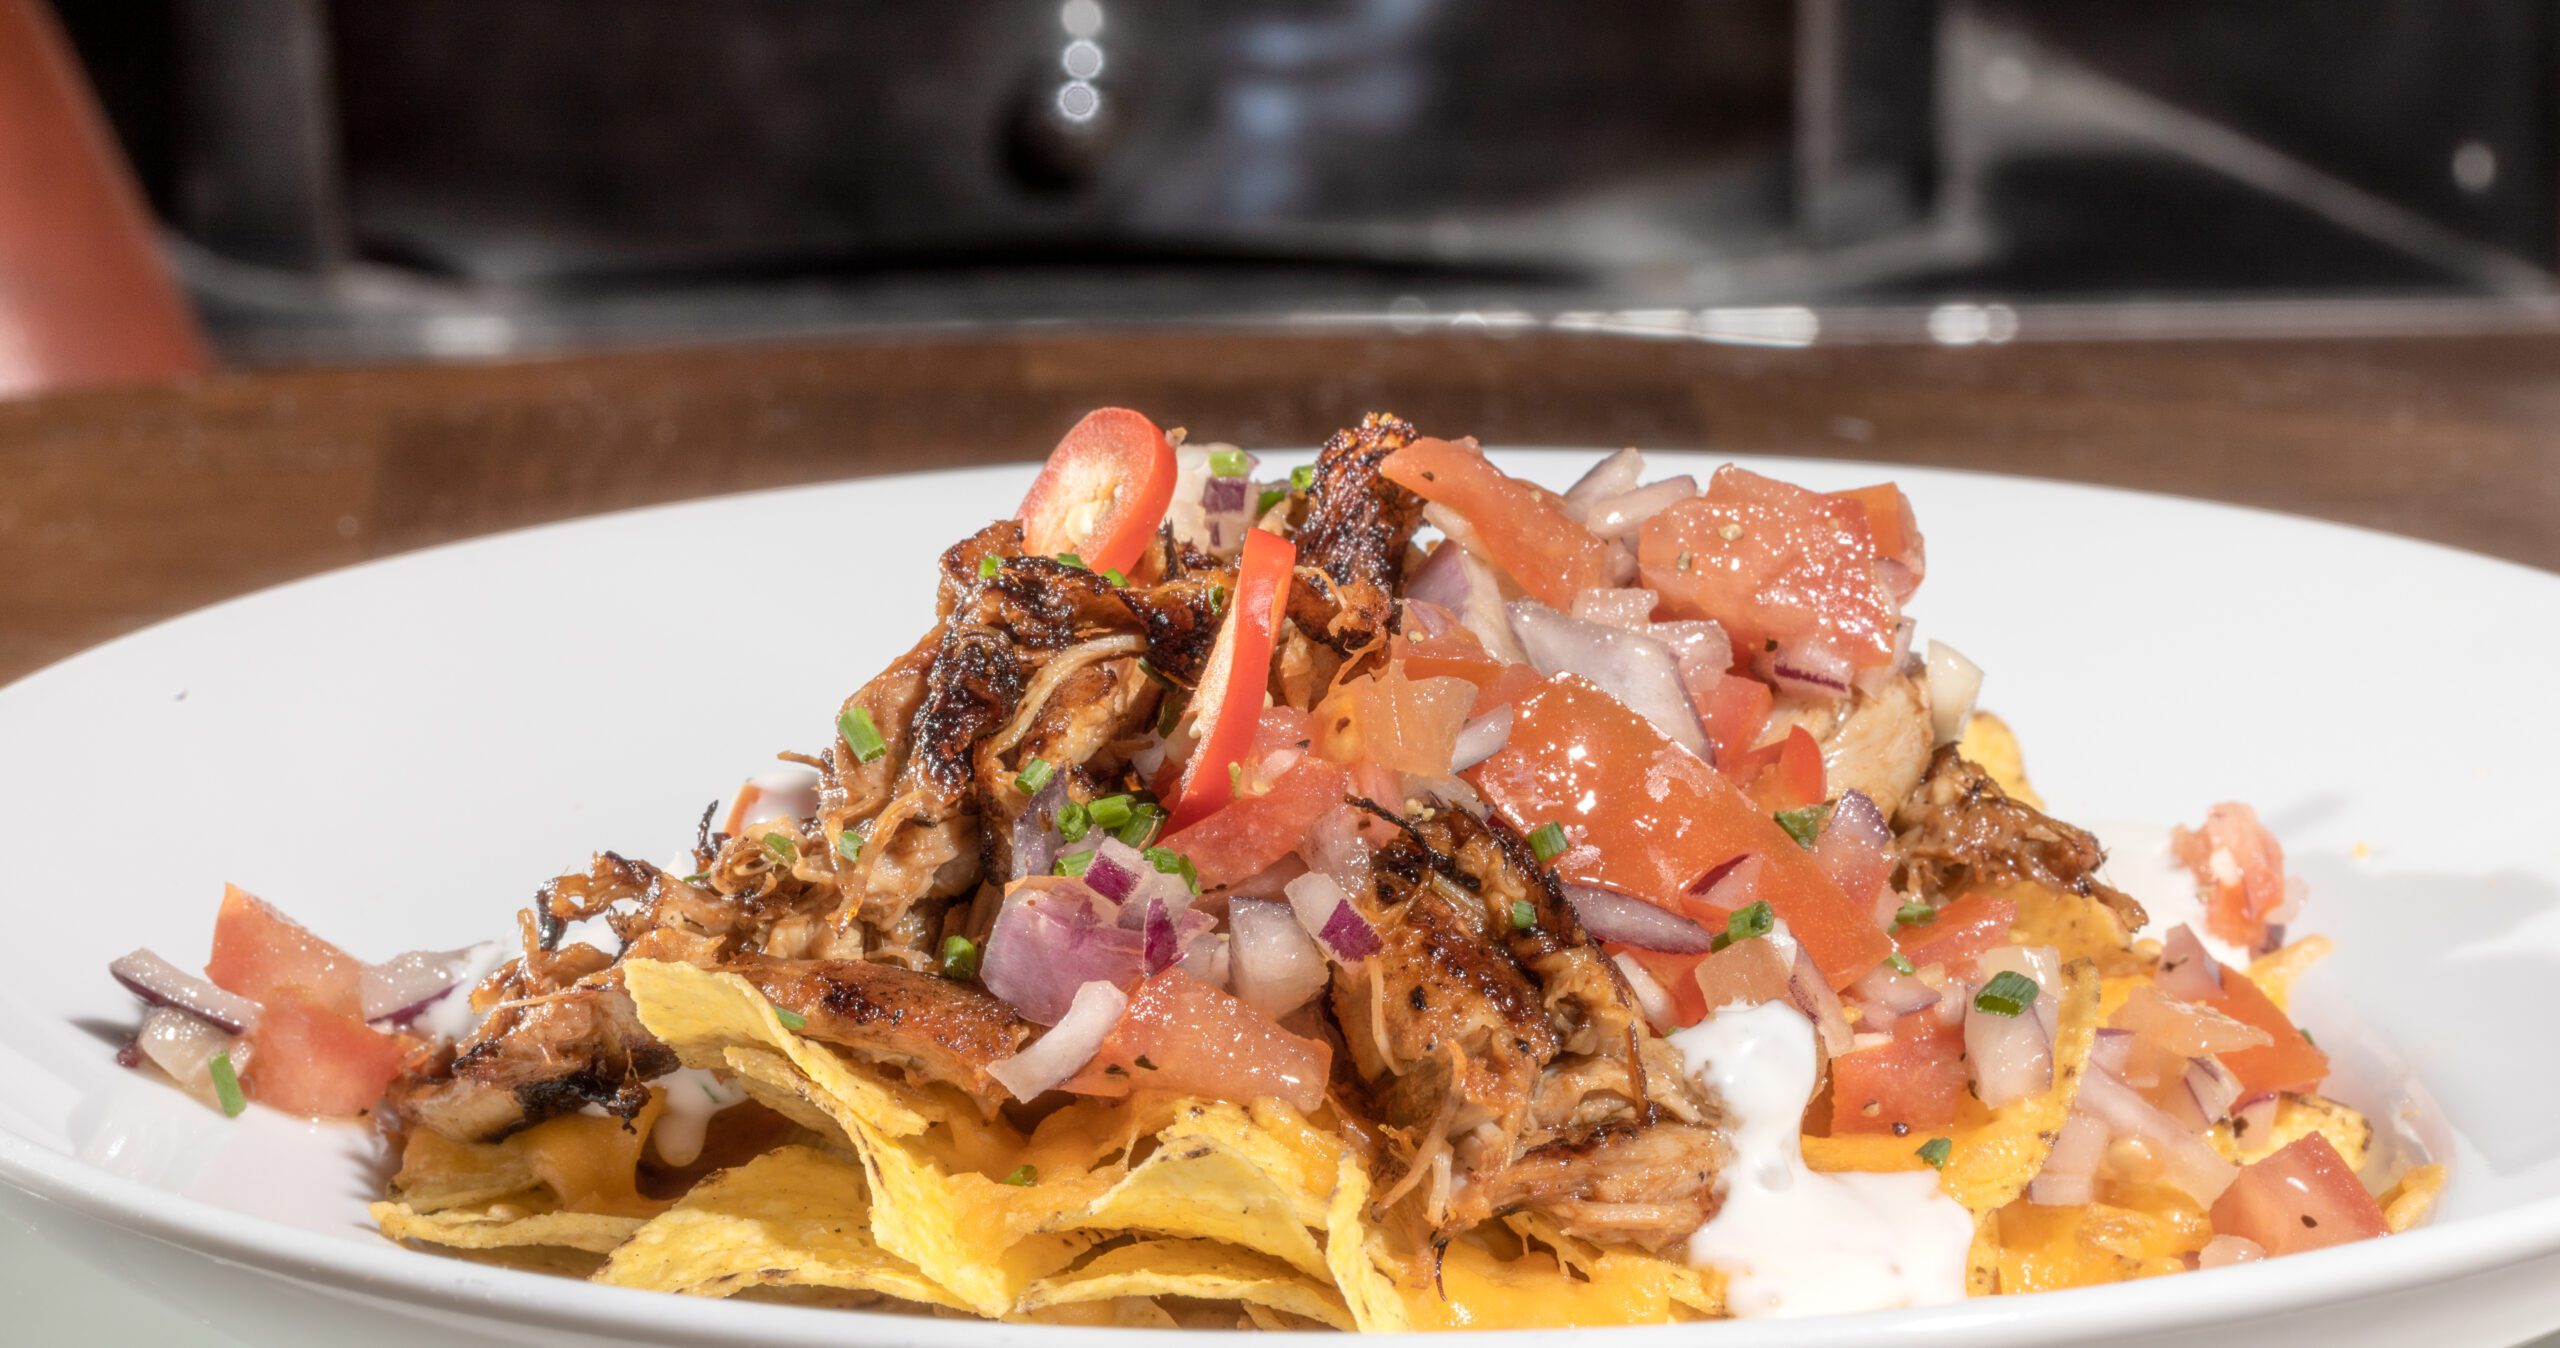 Pulled pork nachos smothered in smoky BBQ sauce, garlic aioli melted cheddar and topped with Pico de Gallo